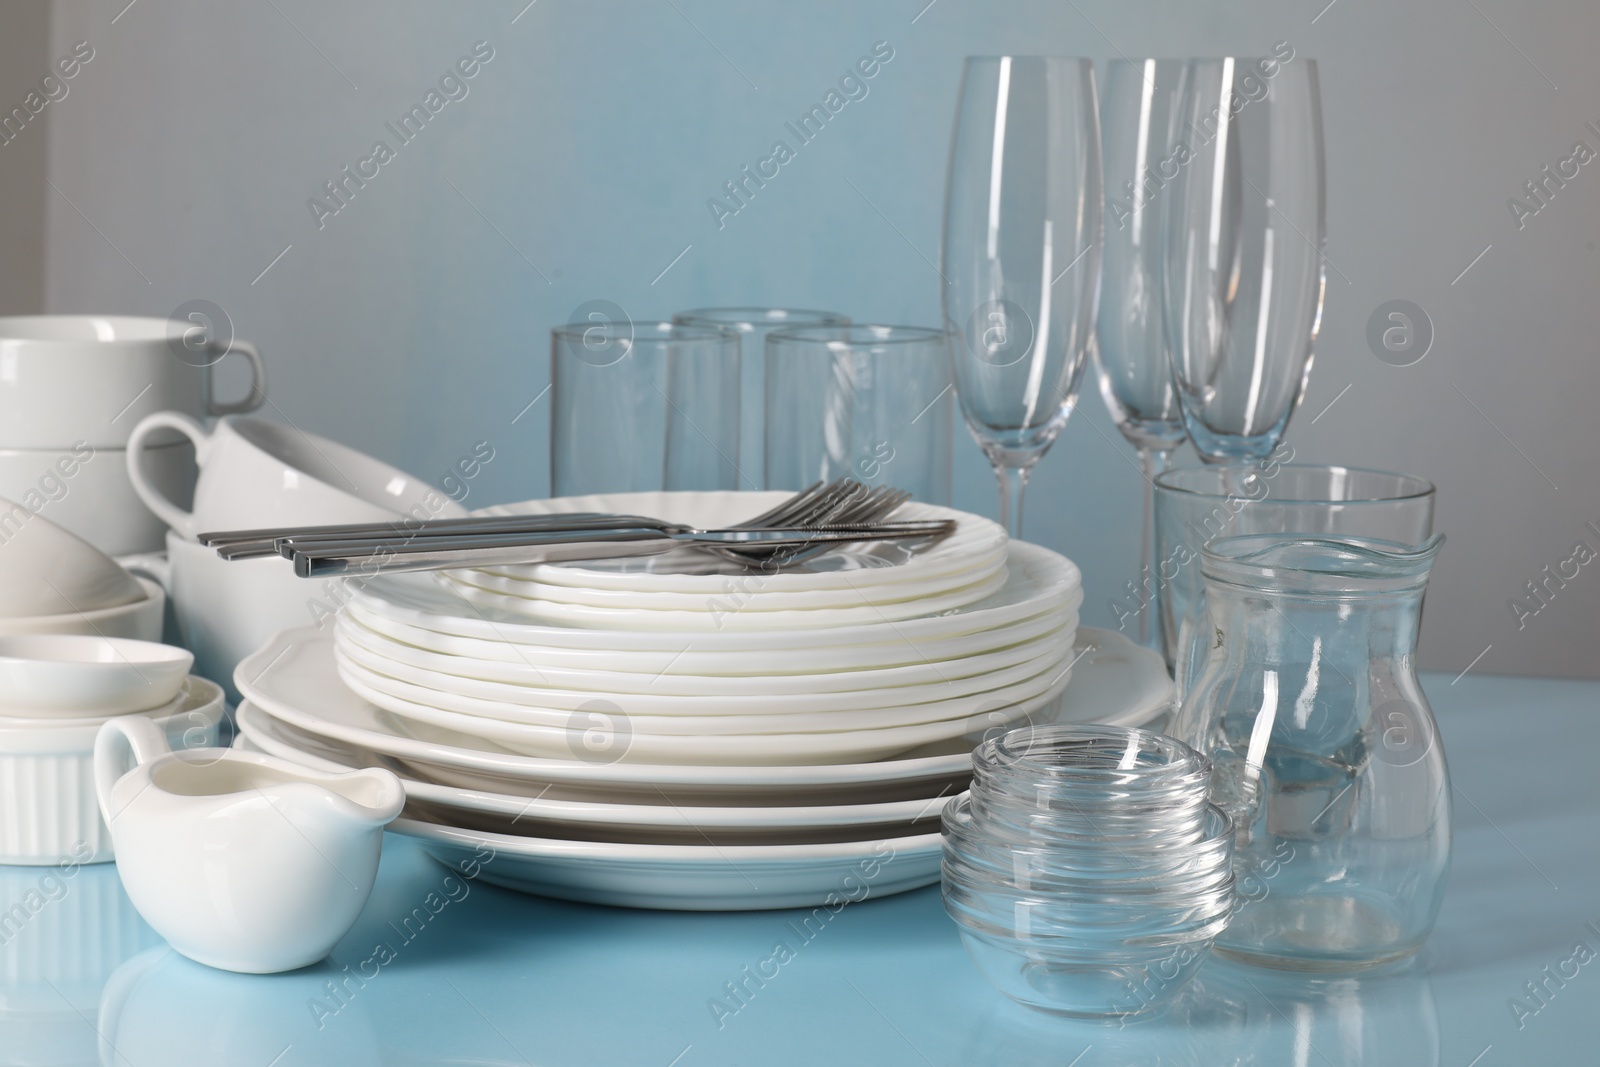 Photo of Set of clean dishes, glasses and cutlery on light blue table